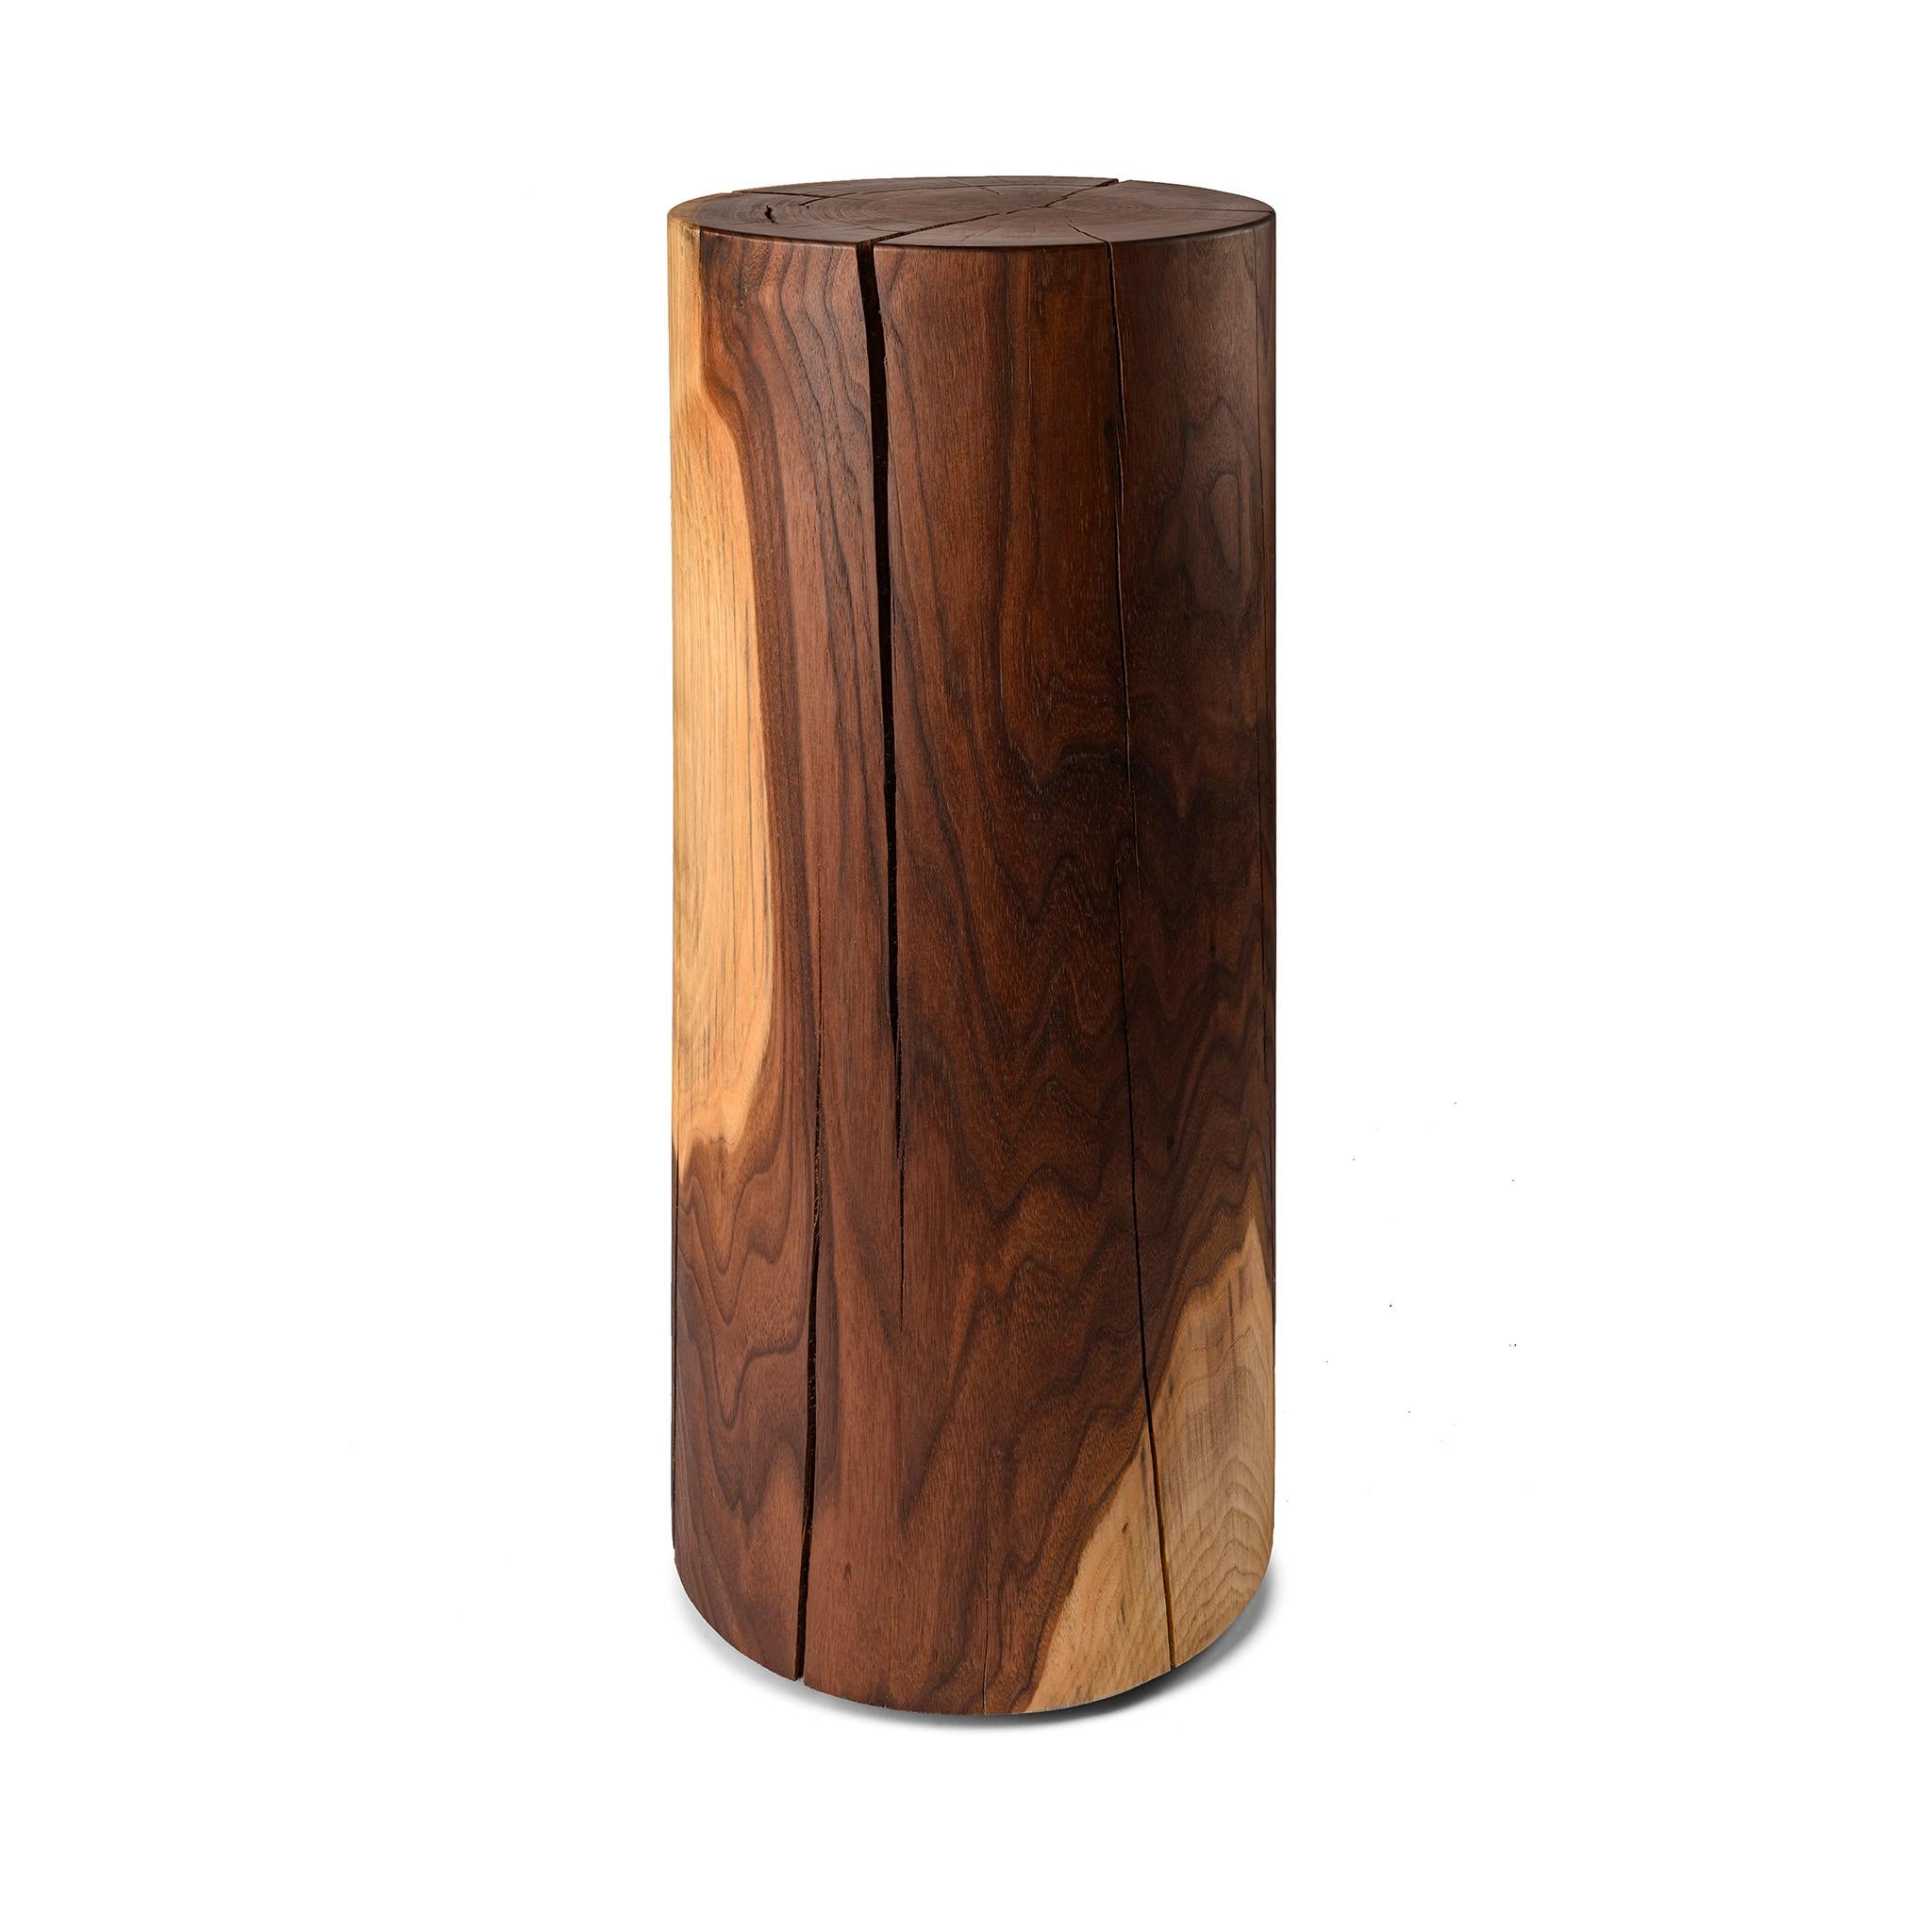 Polar bear side table by Timbart
Dimensions: D 35 x H 75 cm
Material: Solid american walnut wood, oxidative oil.

Timbart is a woodworking atelier from Hungary - specialising in hardwood flooring, cutom-made furniture, and any kind of solid wood